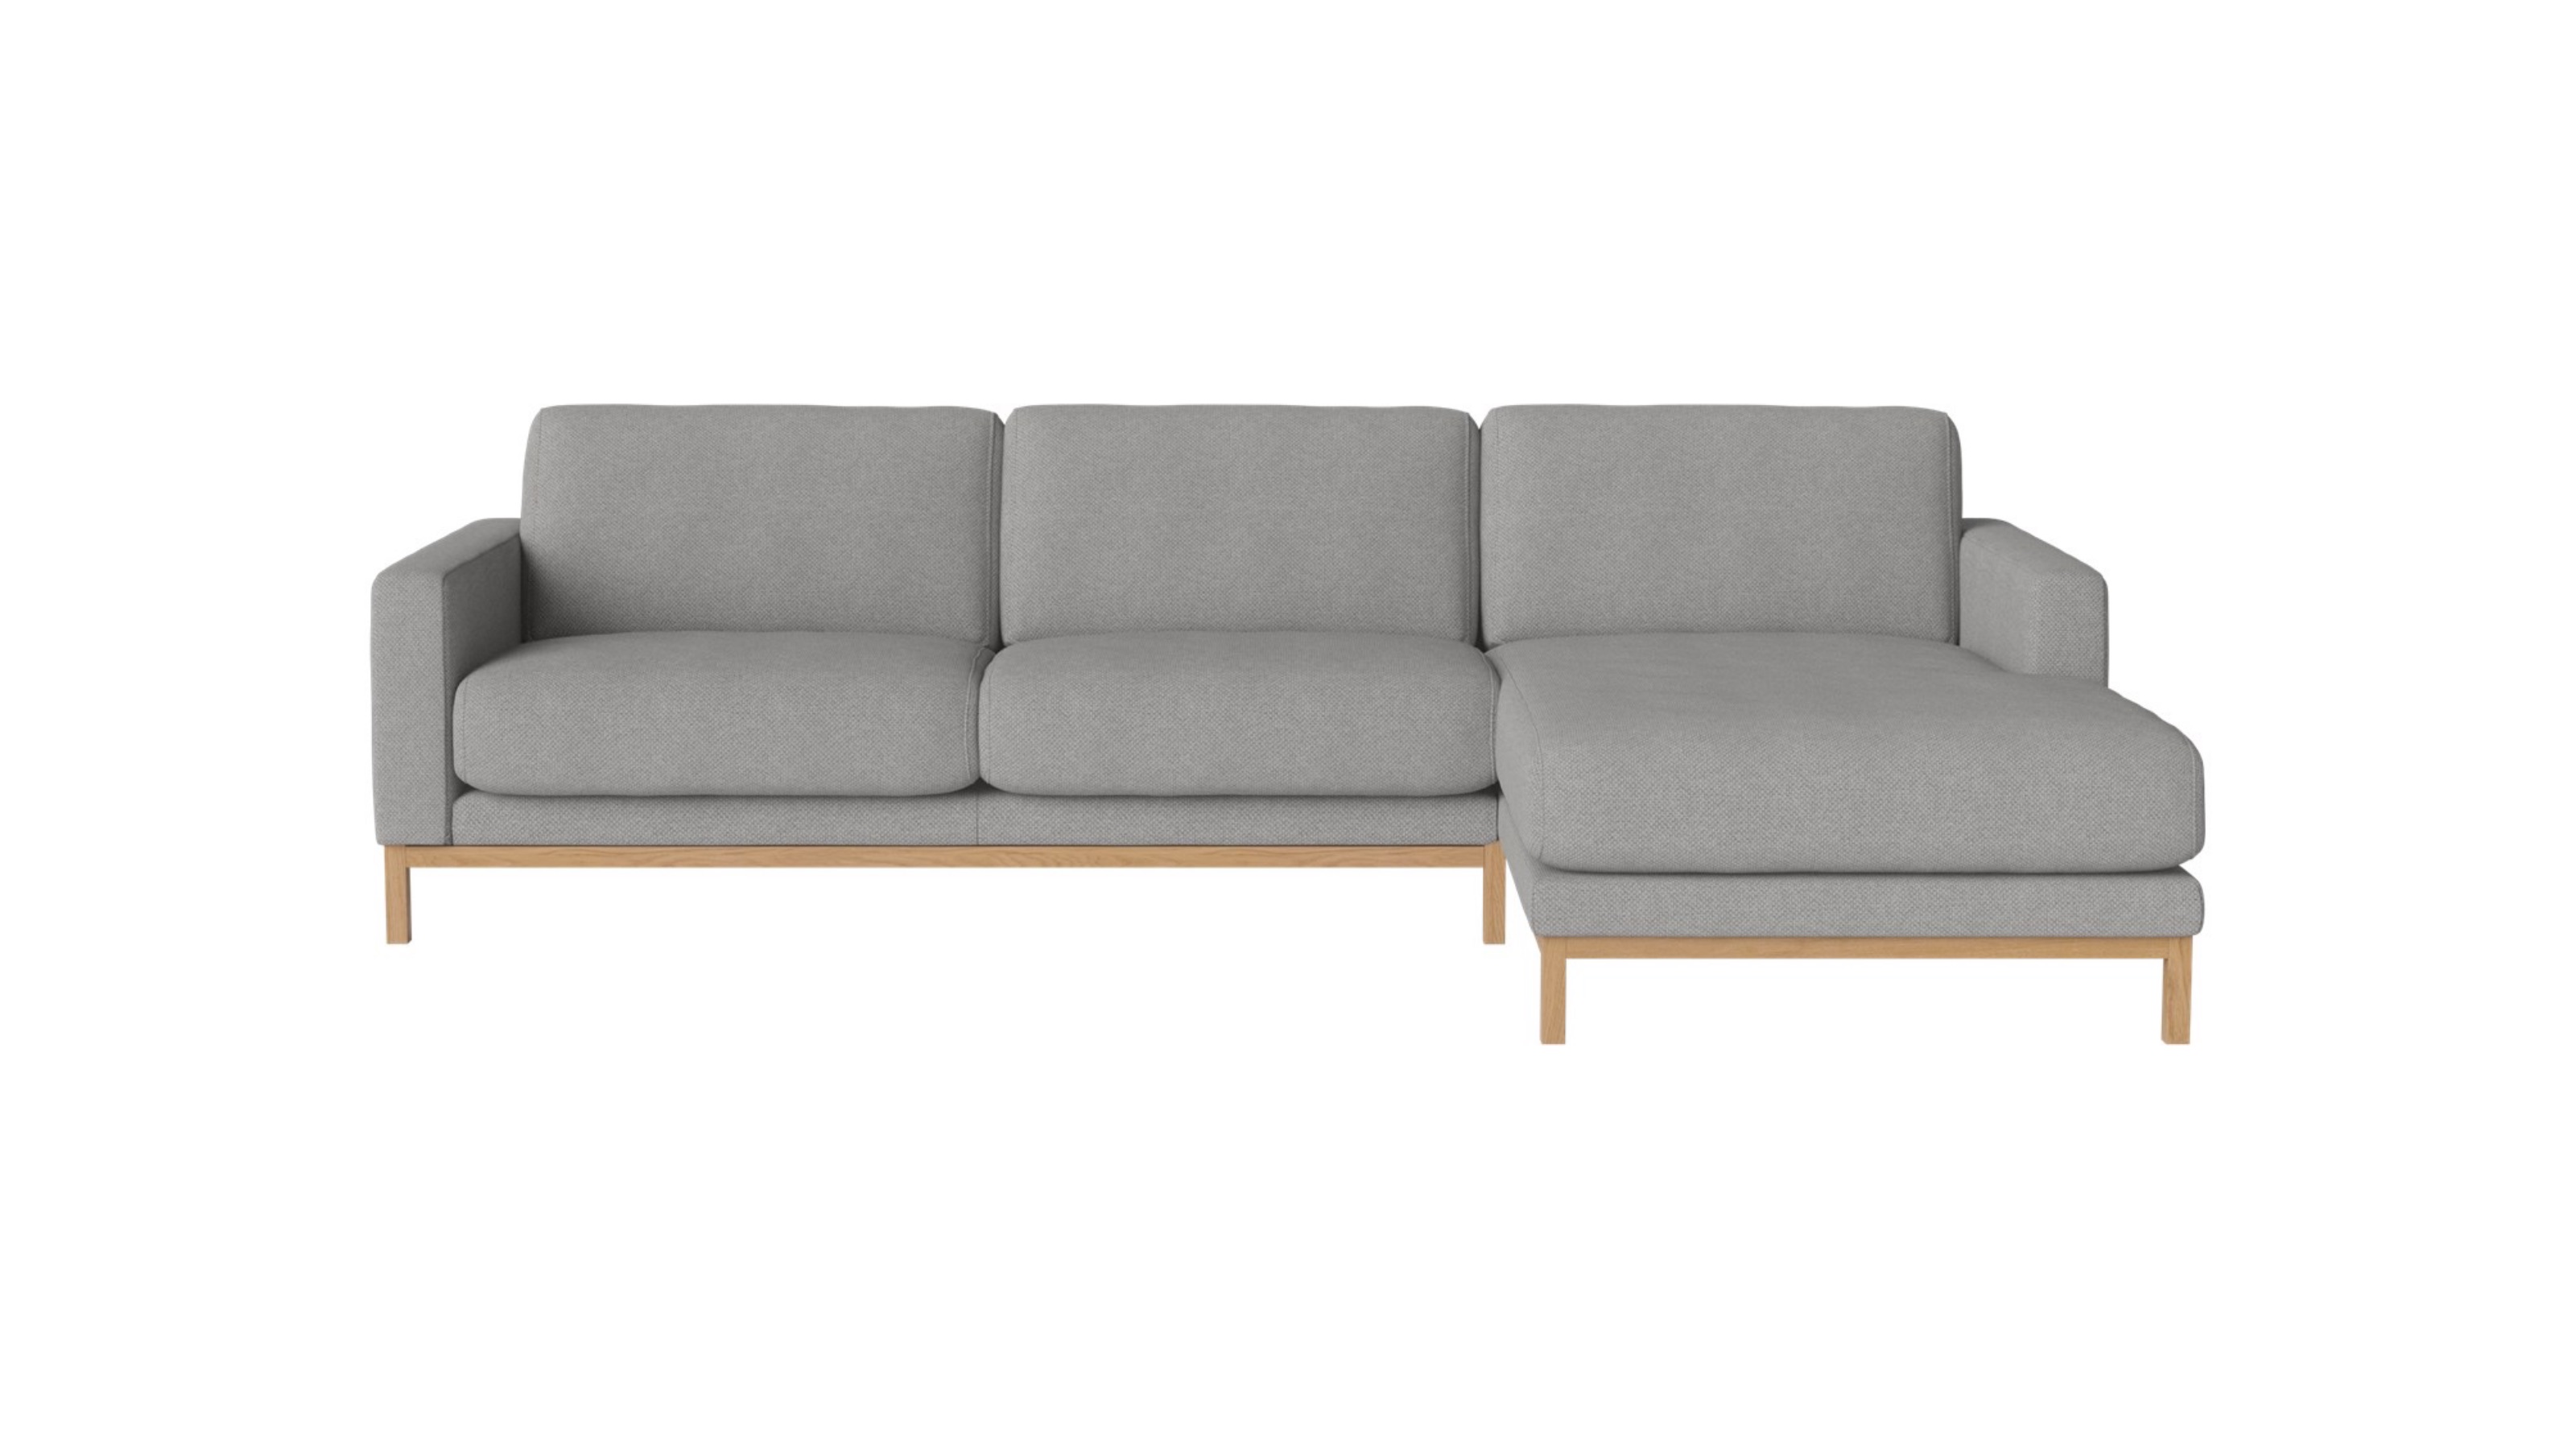 North Lounge Sofa By Bolia Steelcase